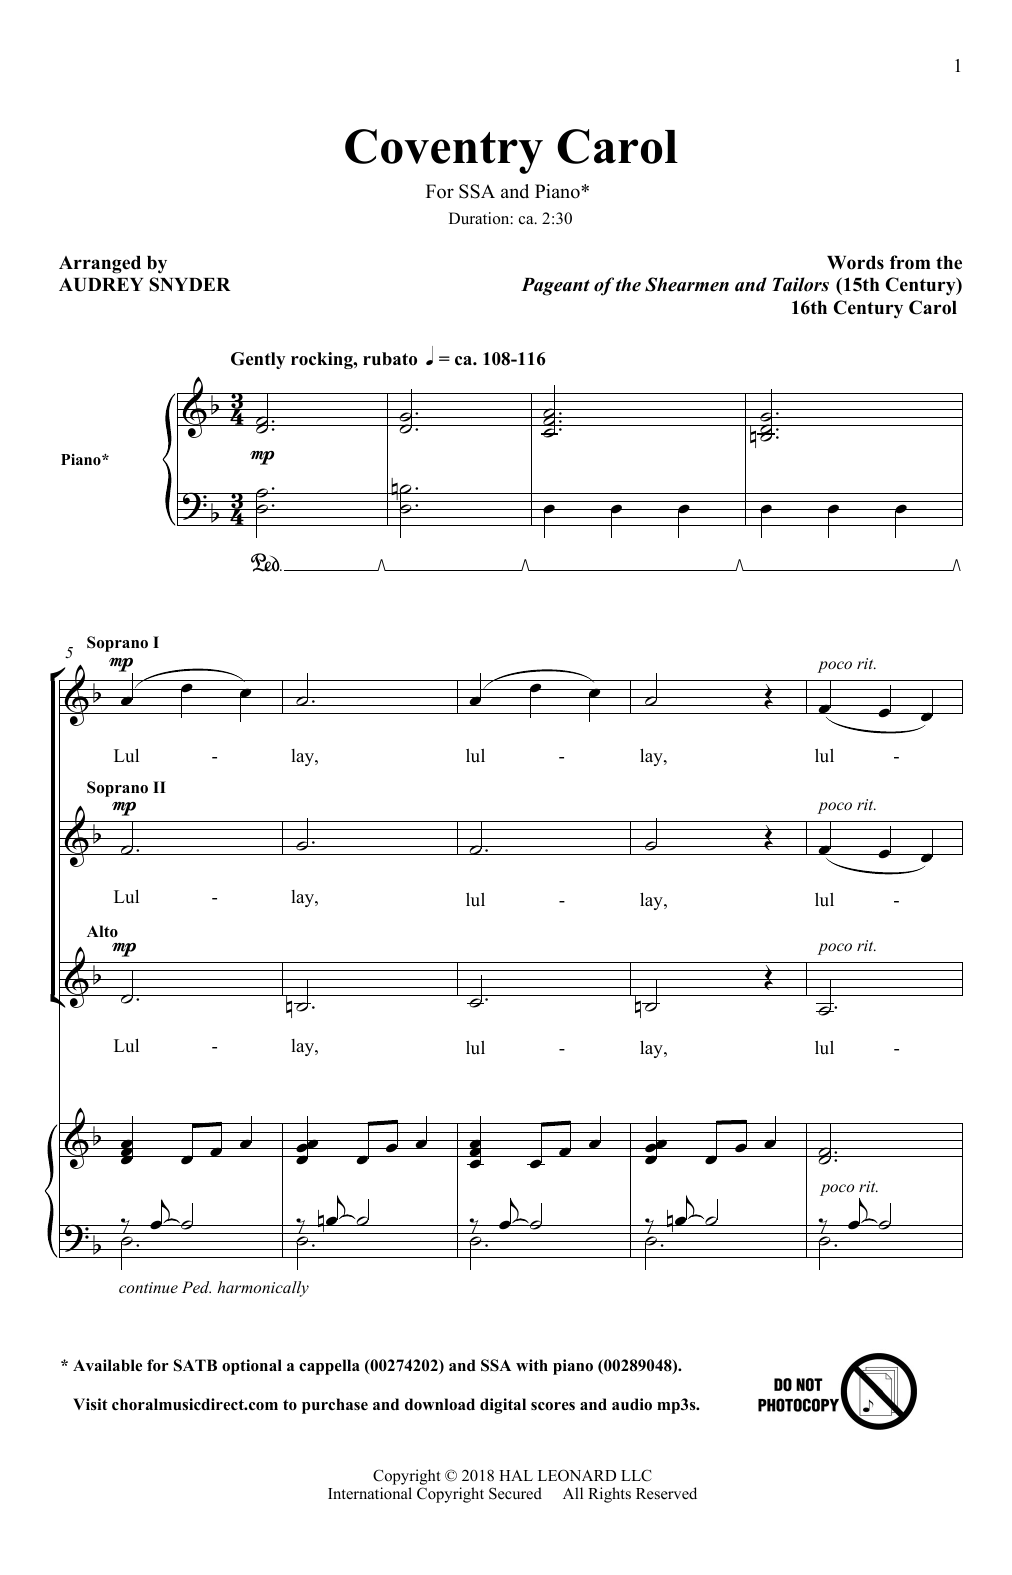 Download Audrey Snyder Coventry Carol Sheet Music